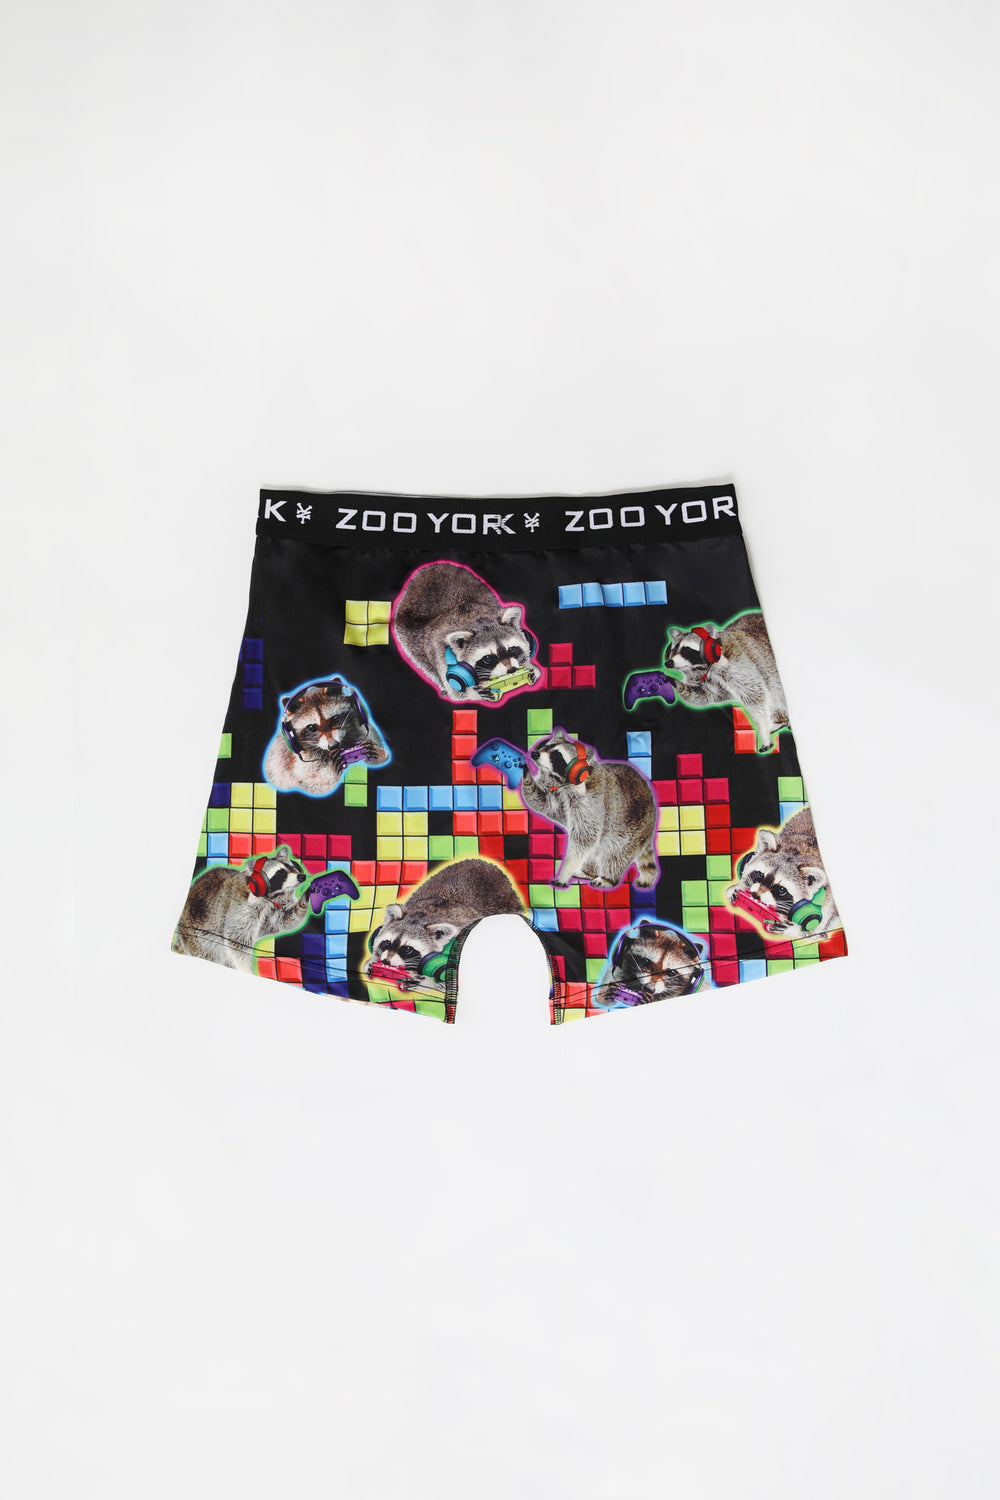 Zoo York Youth Racoon Gamer Boxer Brief Multi